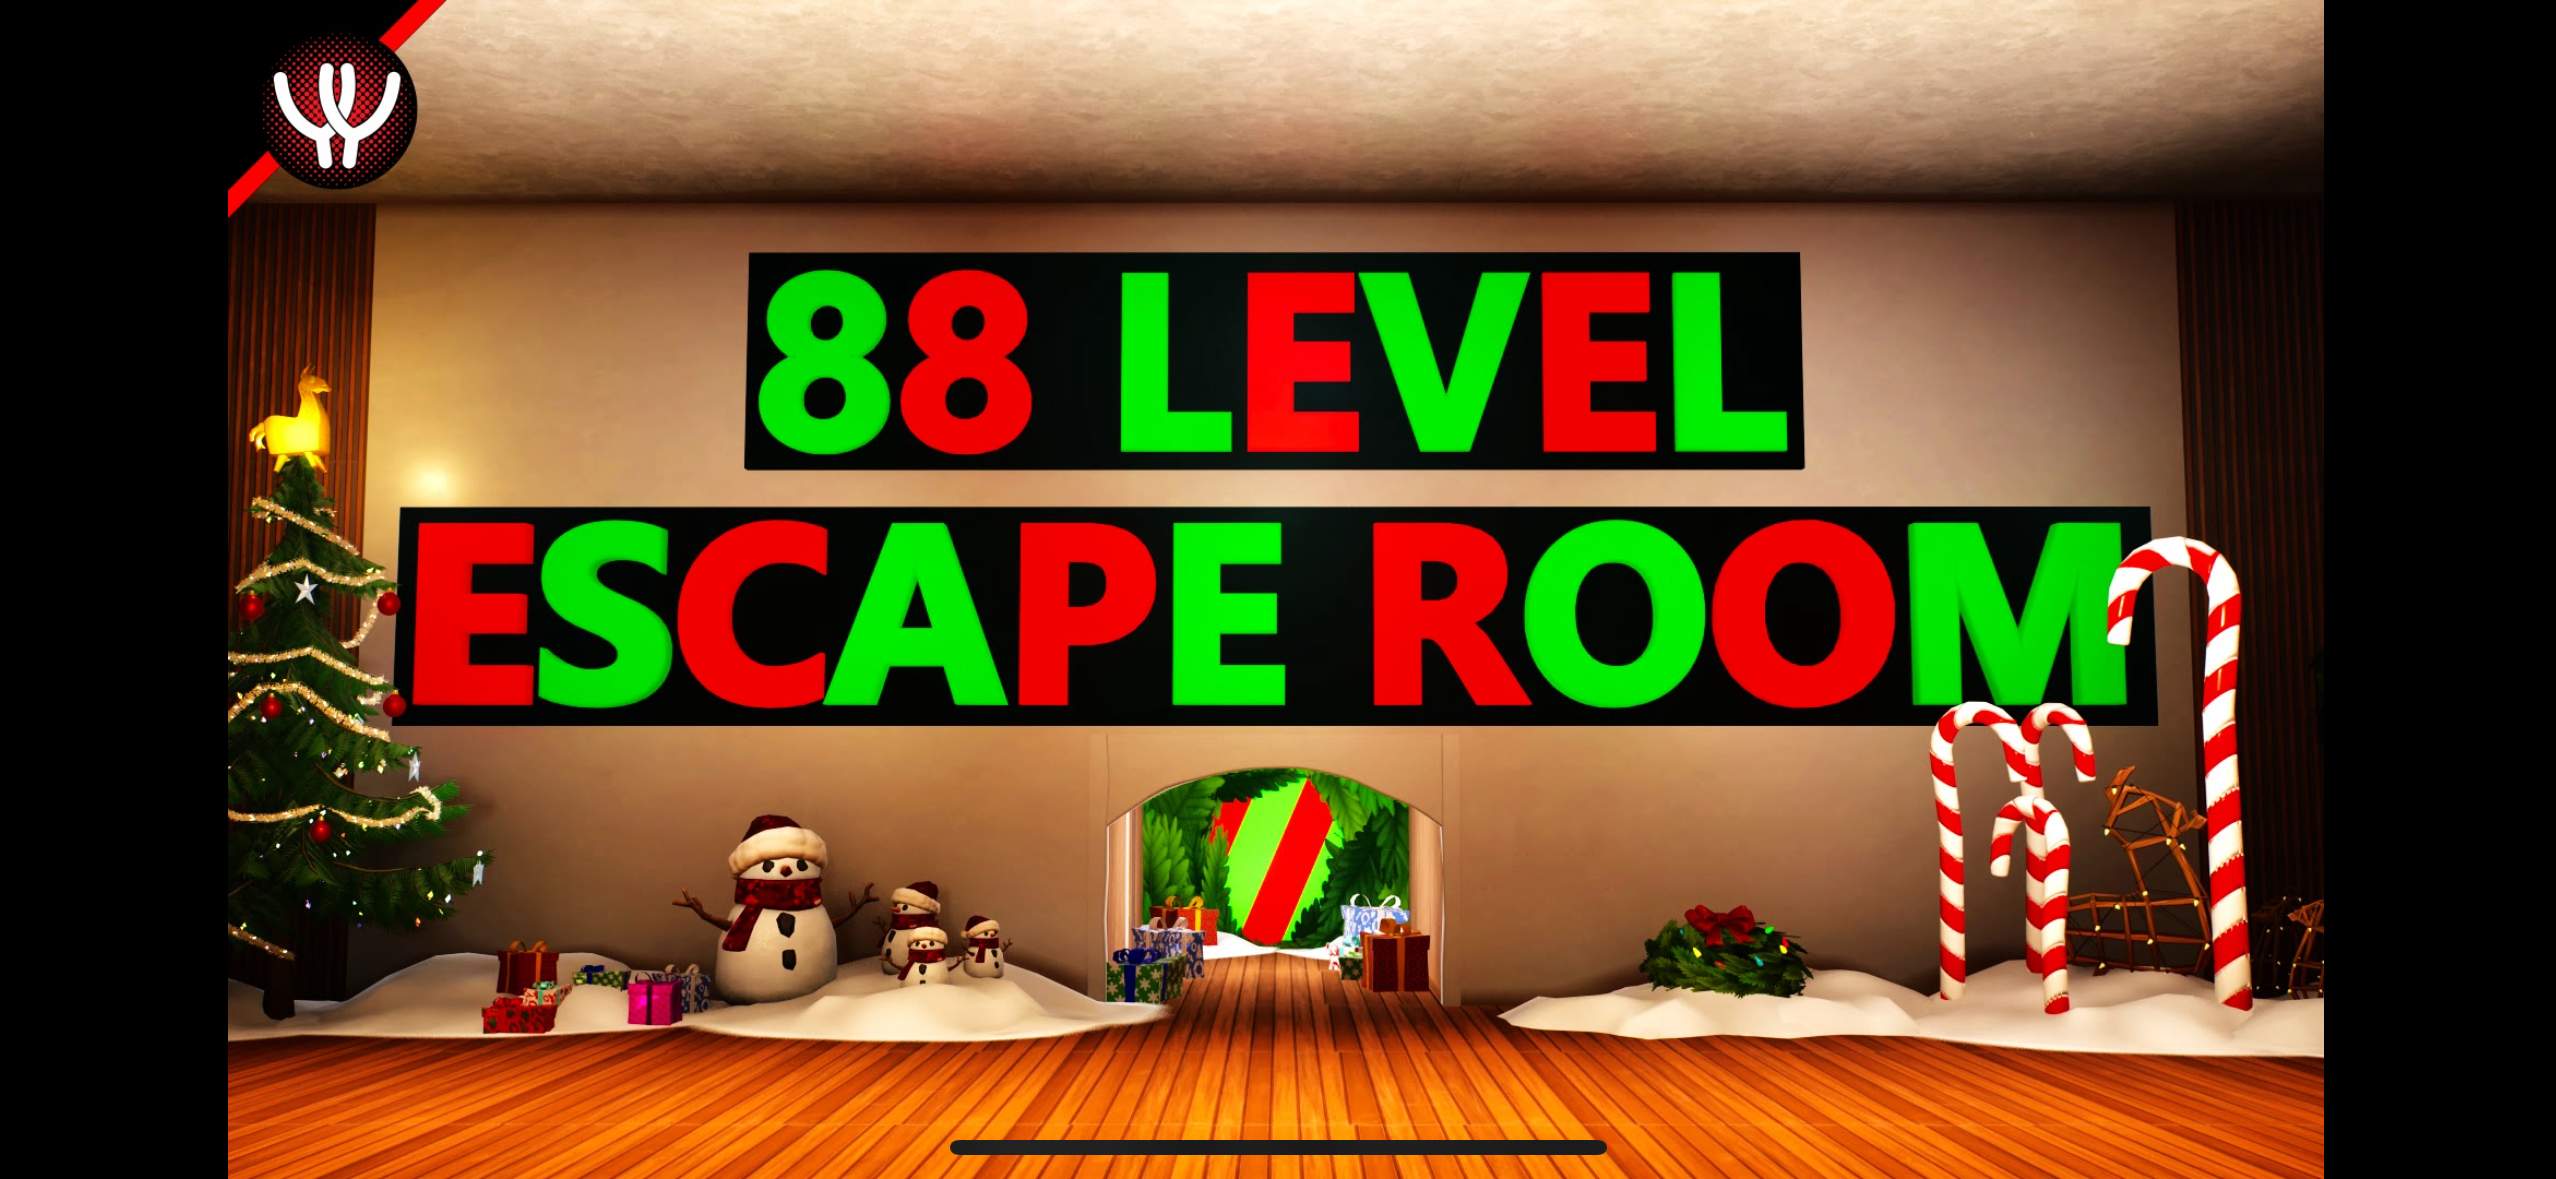 88 Level Escape Room - Holiday